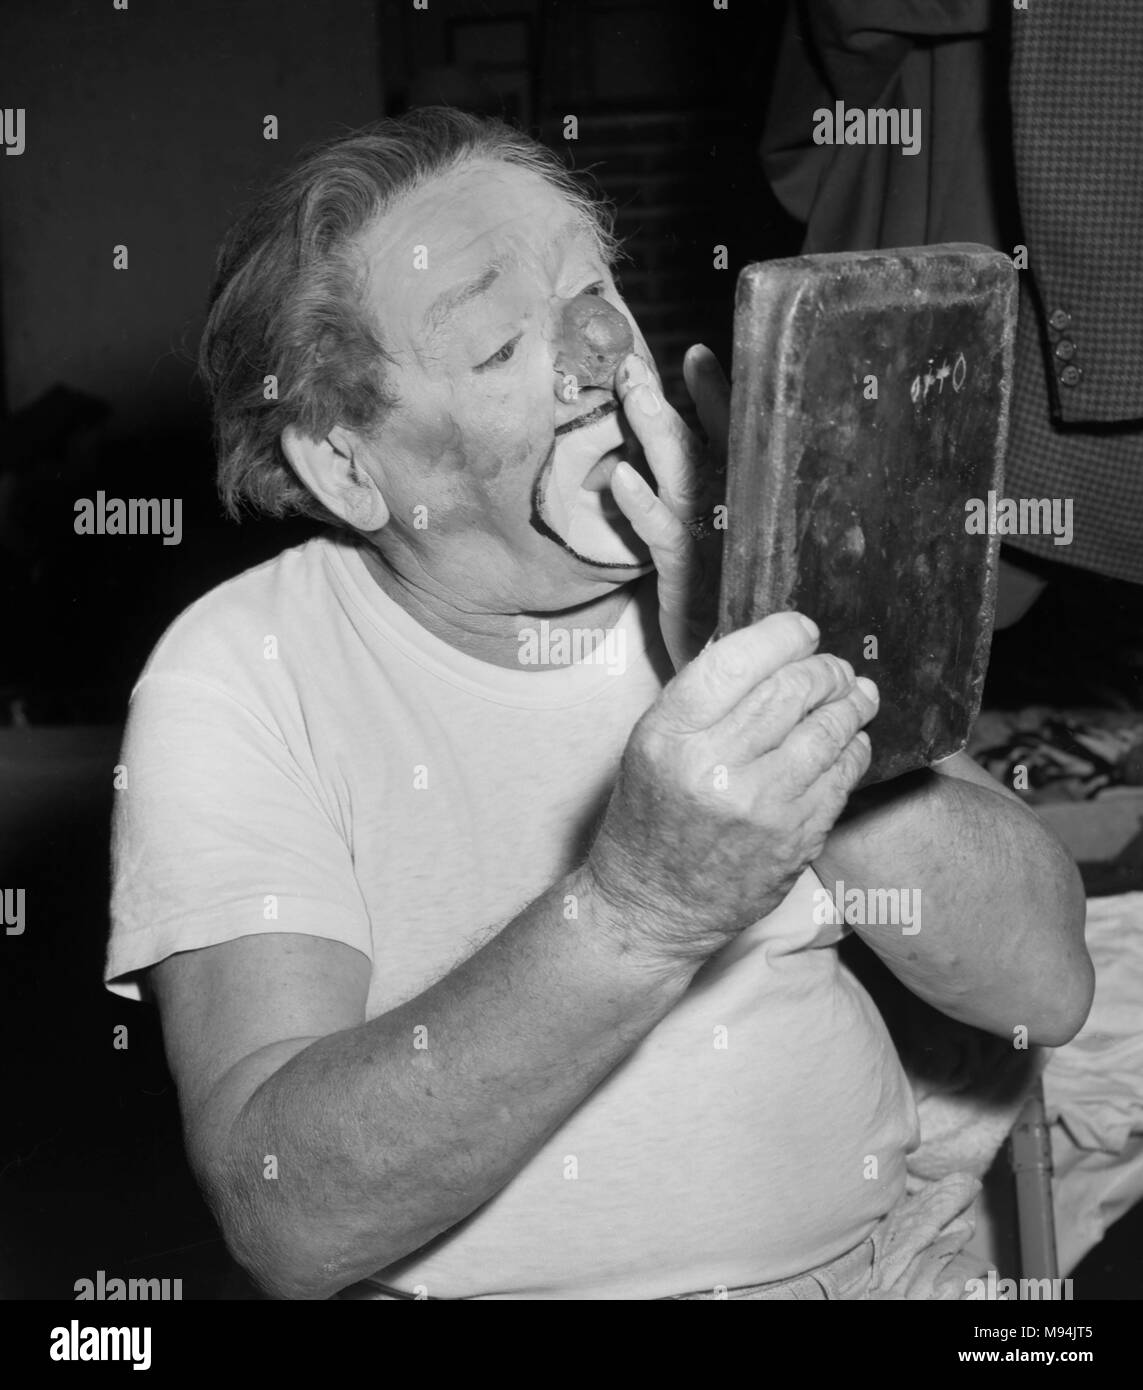 Otto Griebling prepares applies his nose and make-up before a performance with Ringling Bros. and Barnum & Bailey Circus in Georgia in 1962.  He and Emmet Kelly were among the best loved clowns in the United States in the 20th century.  He was best known for a gag with a shrinking block of ice. Stock Photo